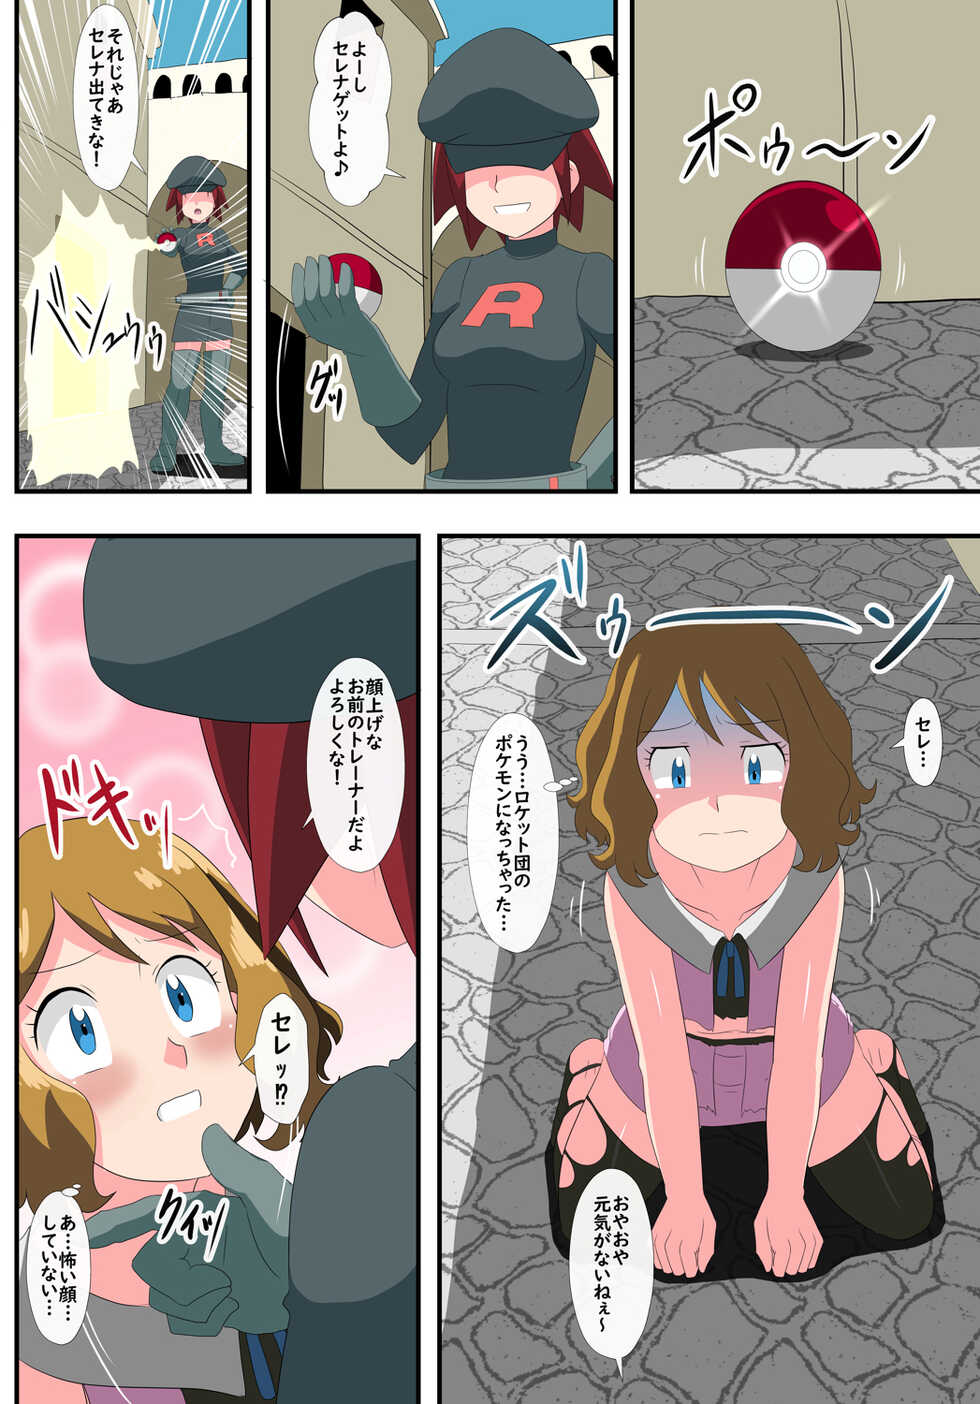 shinenkan  モンスターと思われて捕獲されちゃった！They thought I was a pokemon and captured me ! - Page 6